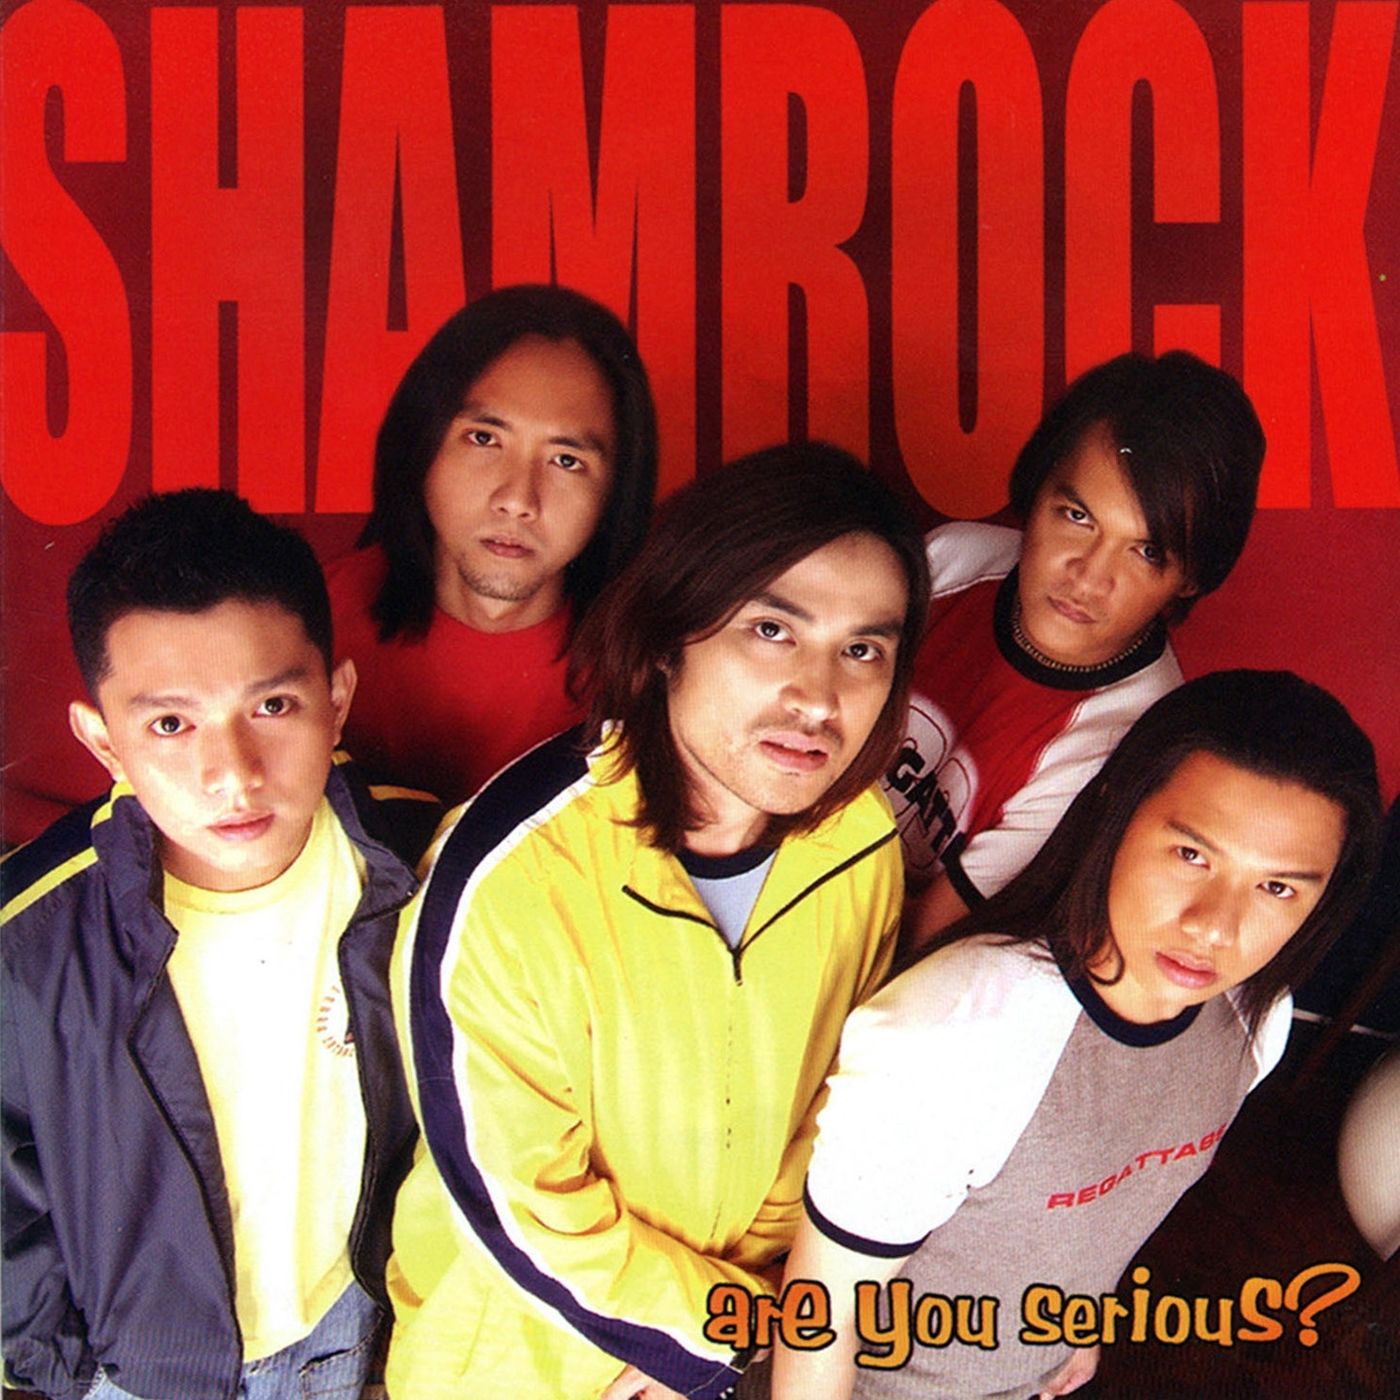 Shamrock - Are You Serious? - 2005 ALBUM